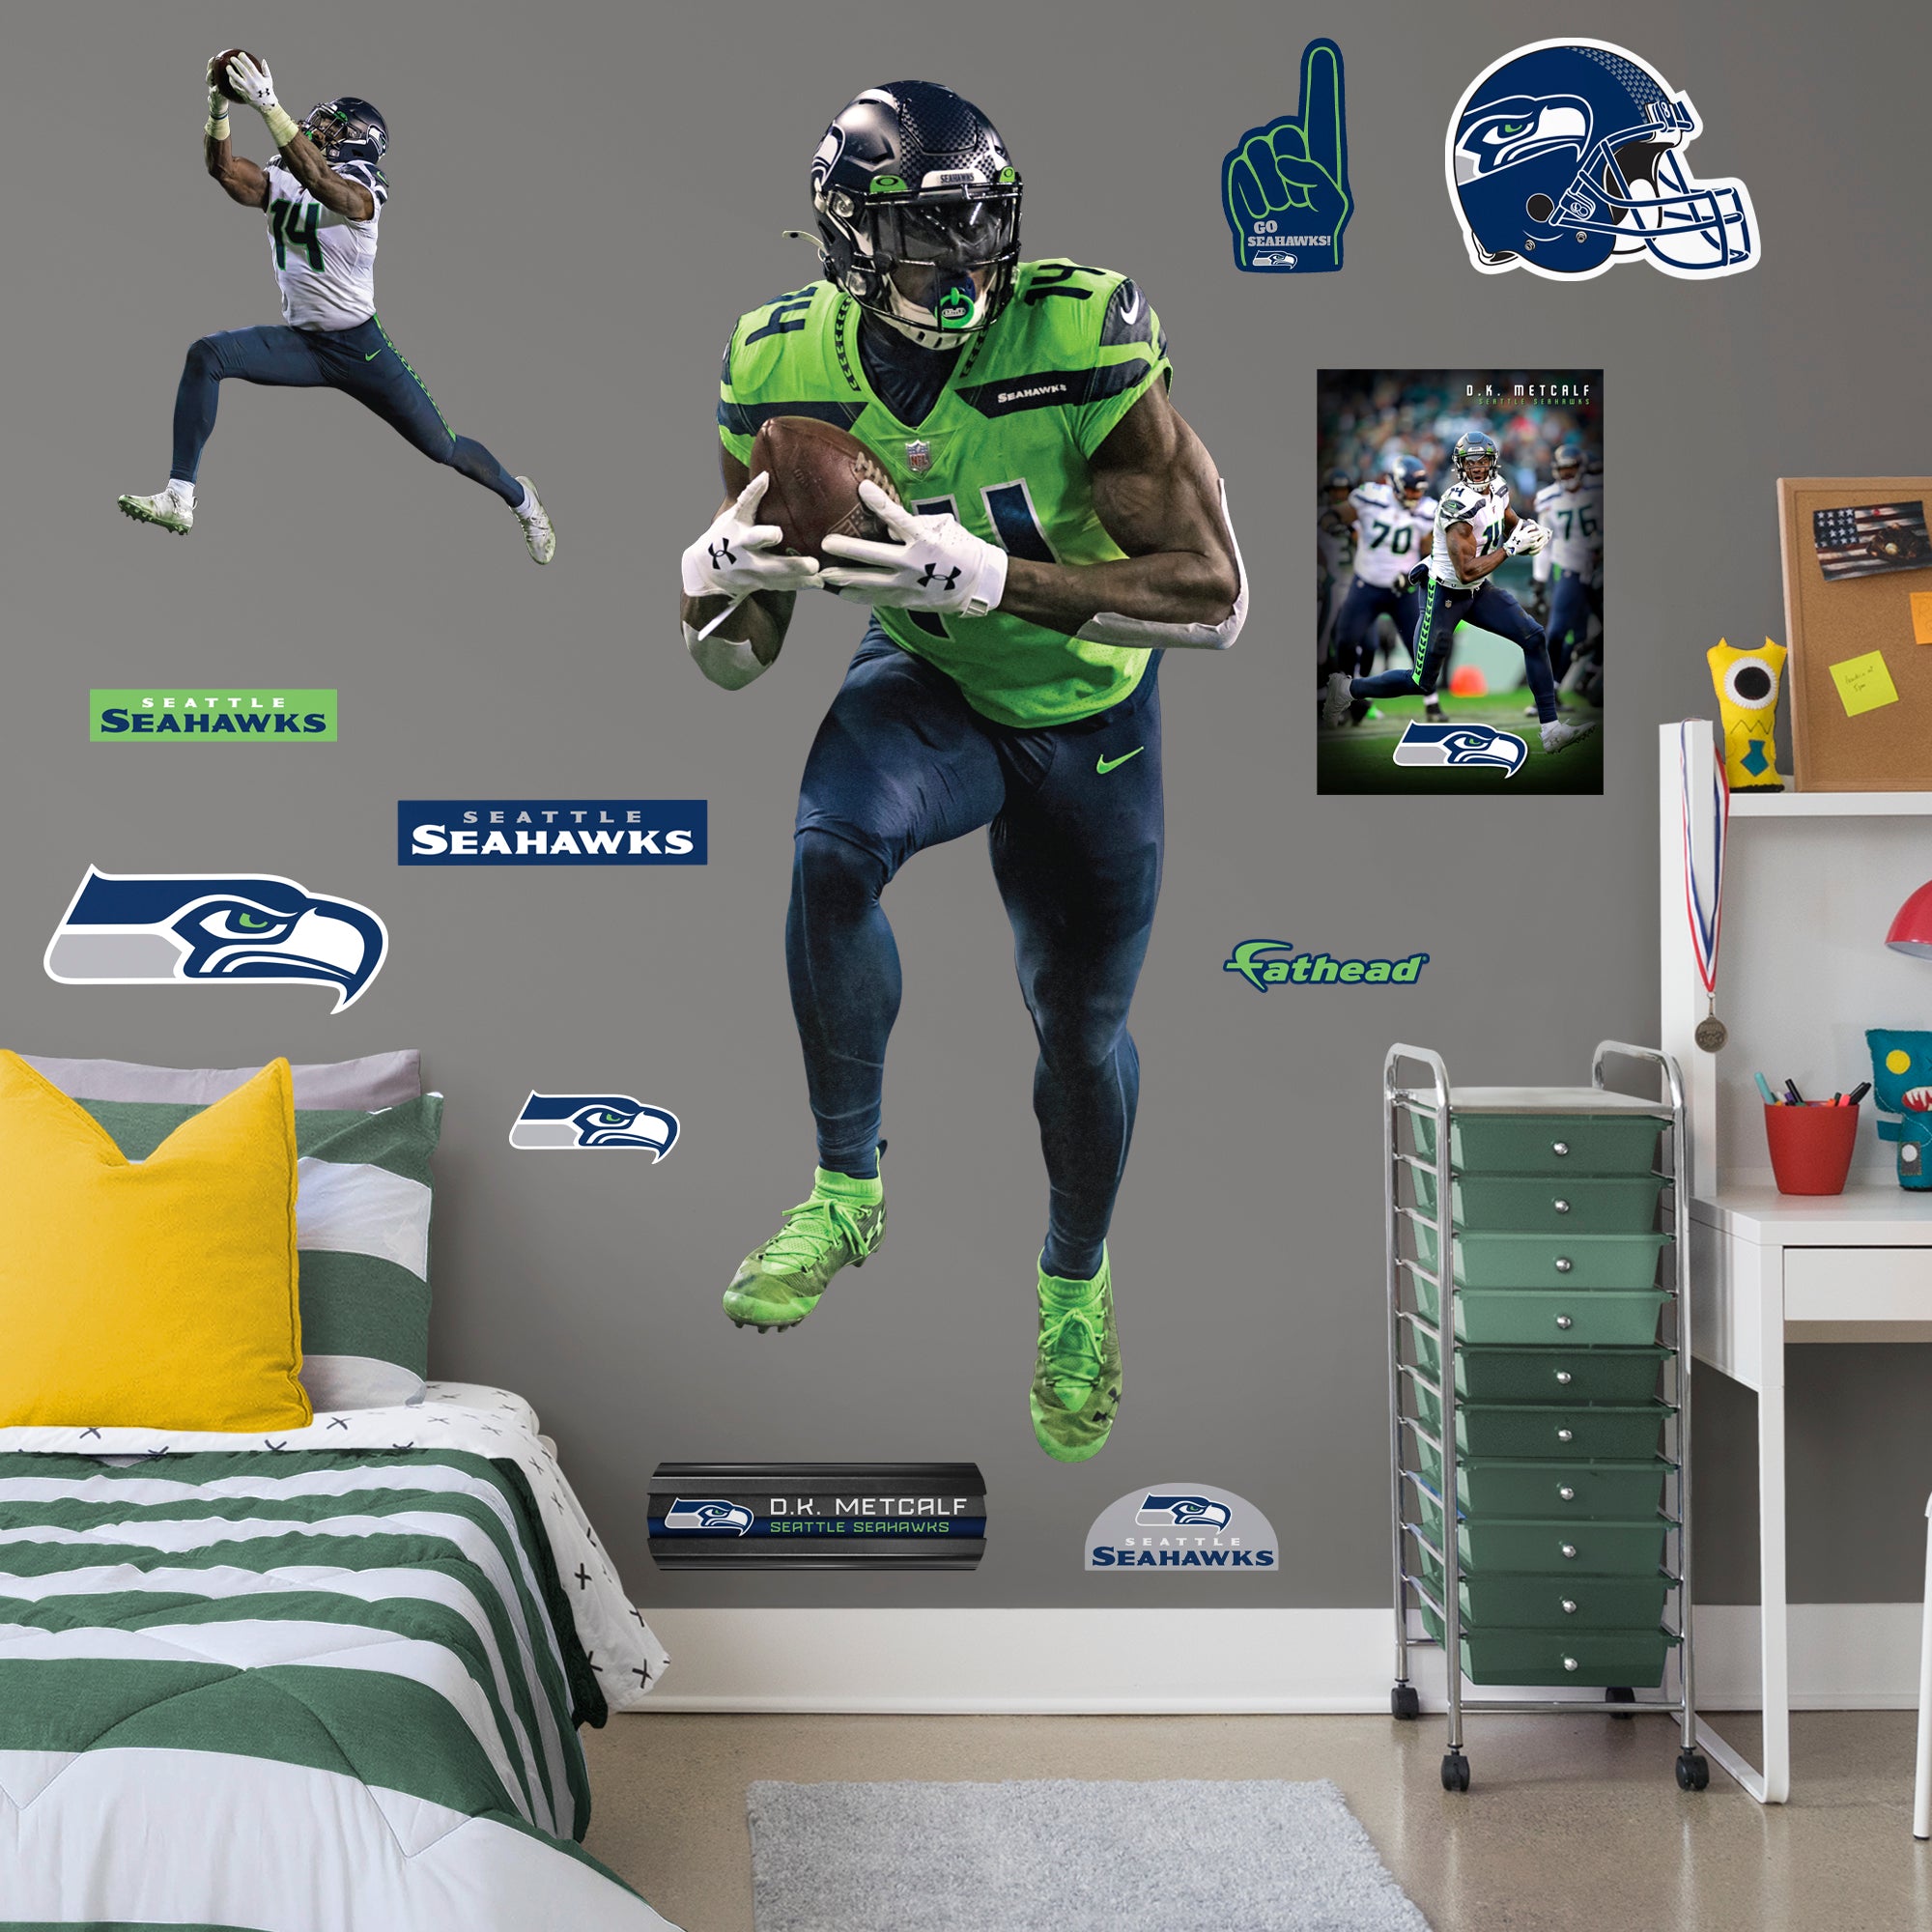 D.K. Metcalf 2020 Green Jersey - Officially Licensed NFL Removable Wall Decal Life-Size Athlete + 11 Decals (32"W x 77"H) by Fat